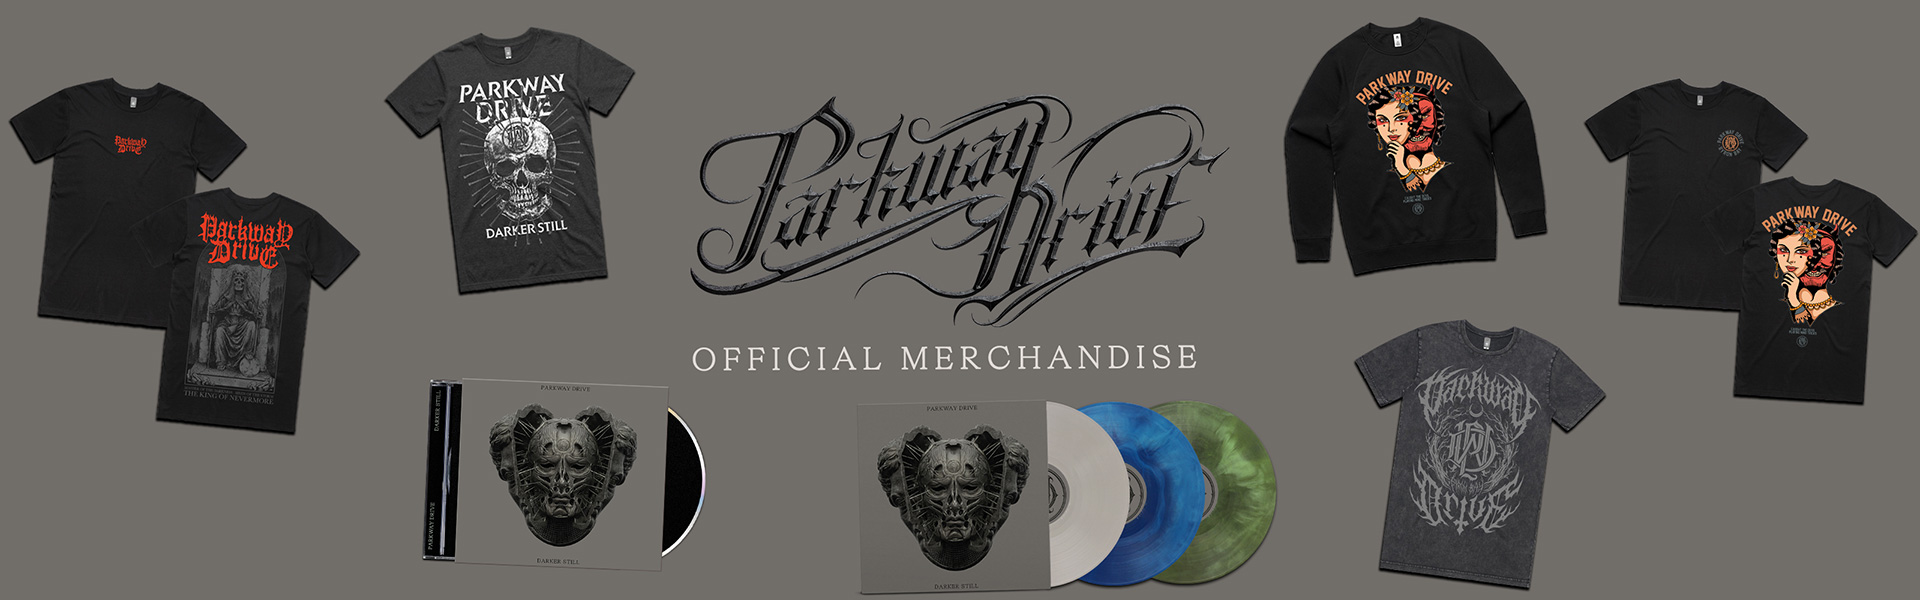 Parkway Drive Official Merchandise